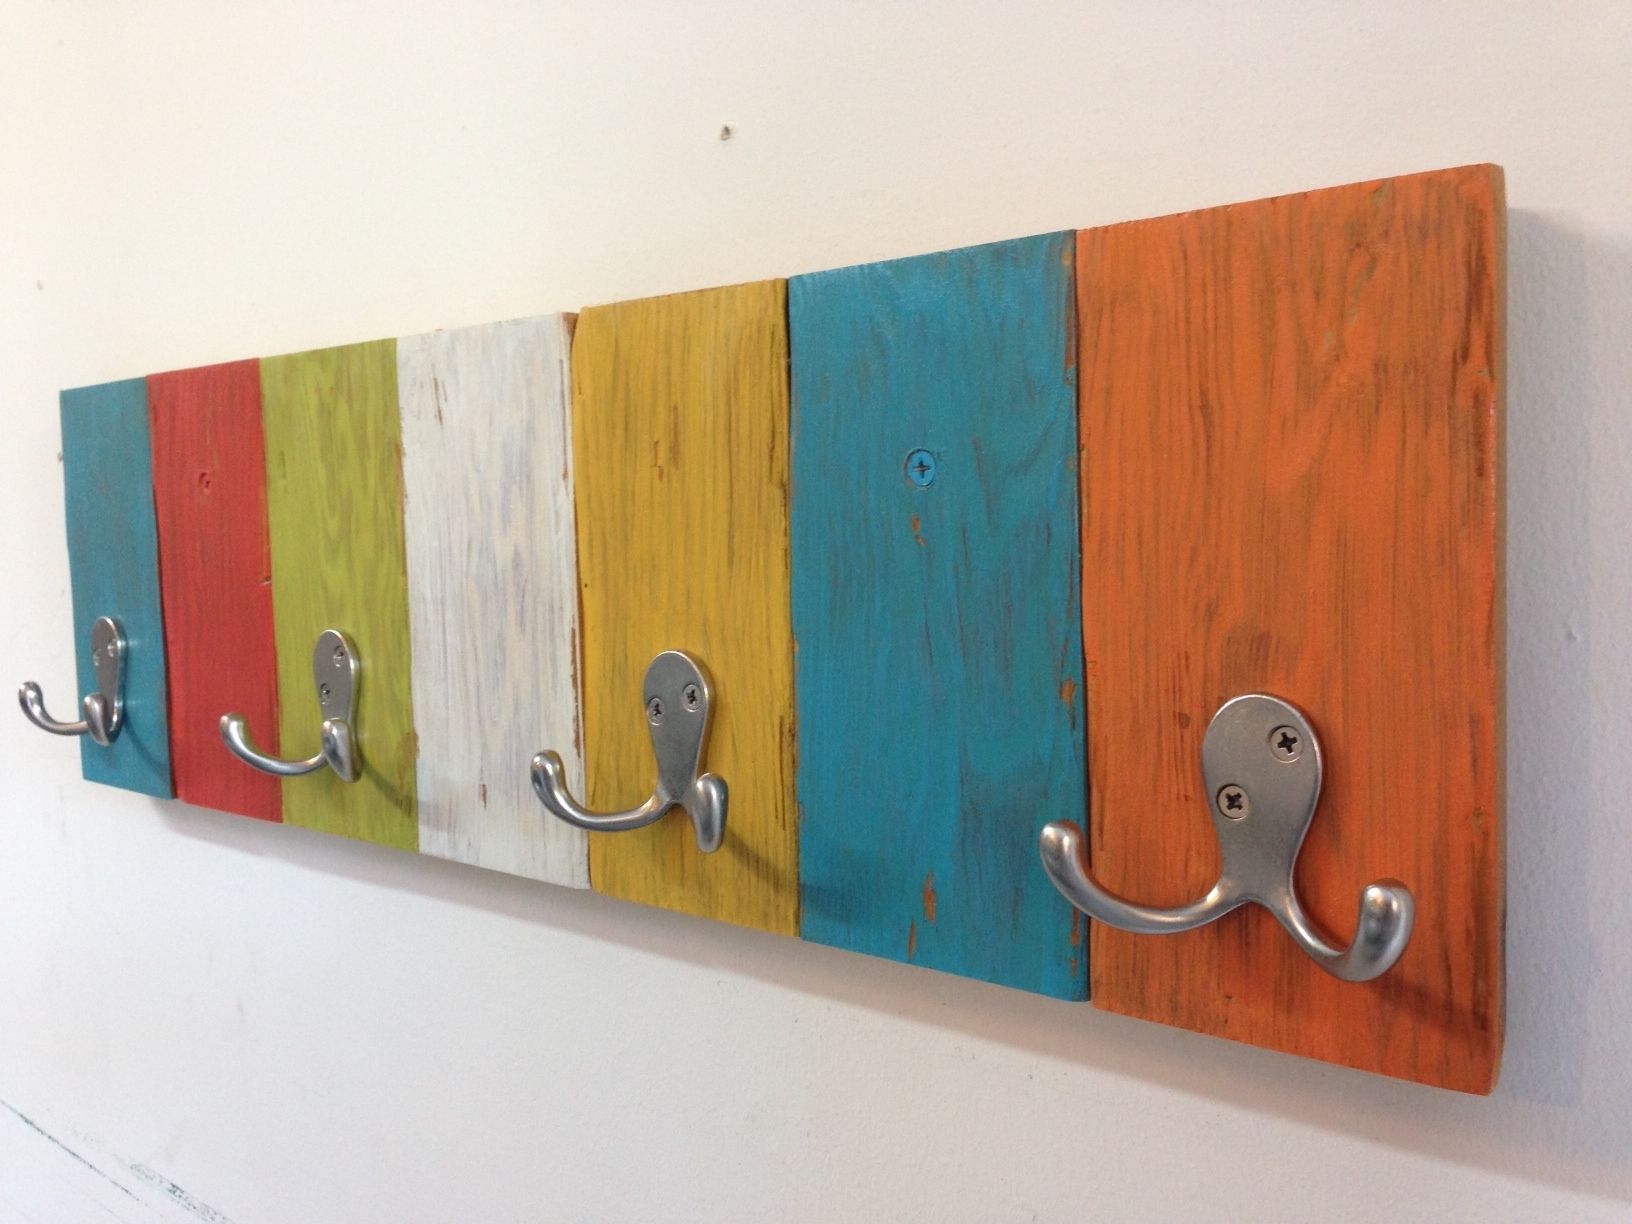 Current Wall Art Coat Hooks Pertaining To Handmade Kids Coat Hook Rack With Vibrant, Fun Colors (View 10 of 15)